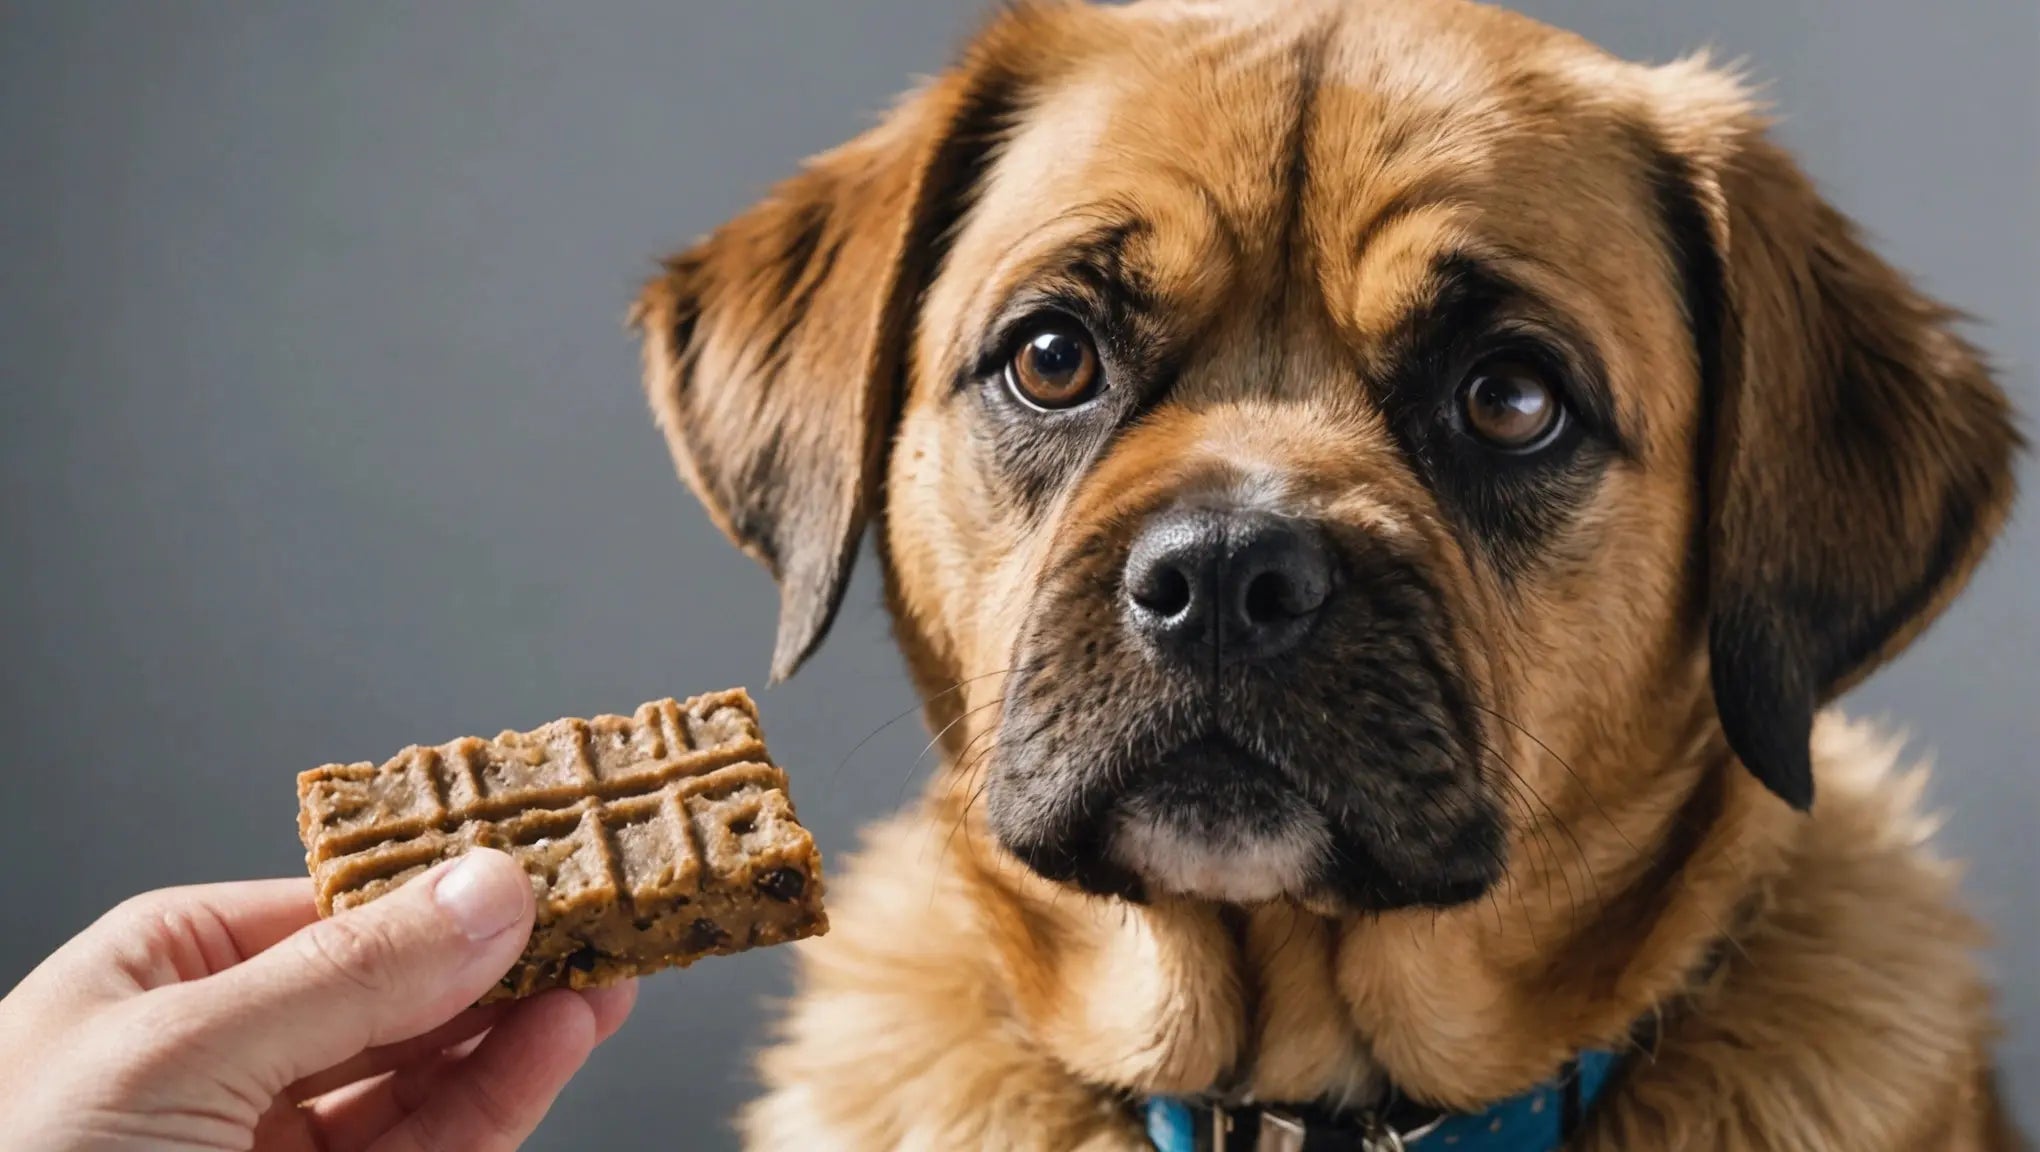 Treat Your Dog to Soft and Chewy Treats They'll Love